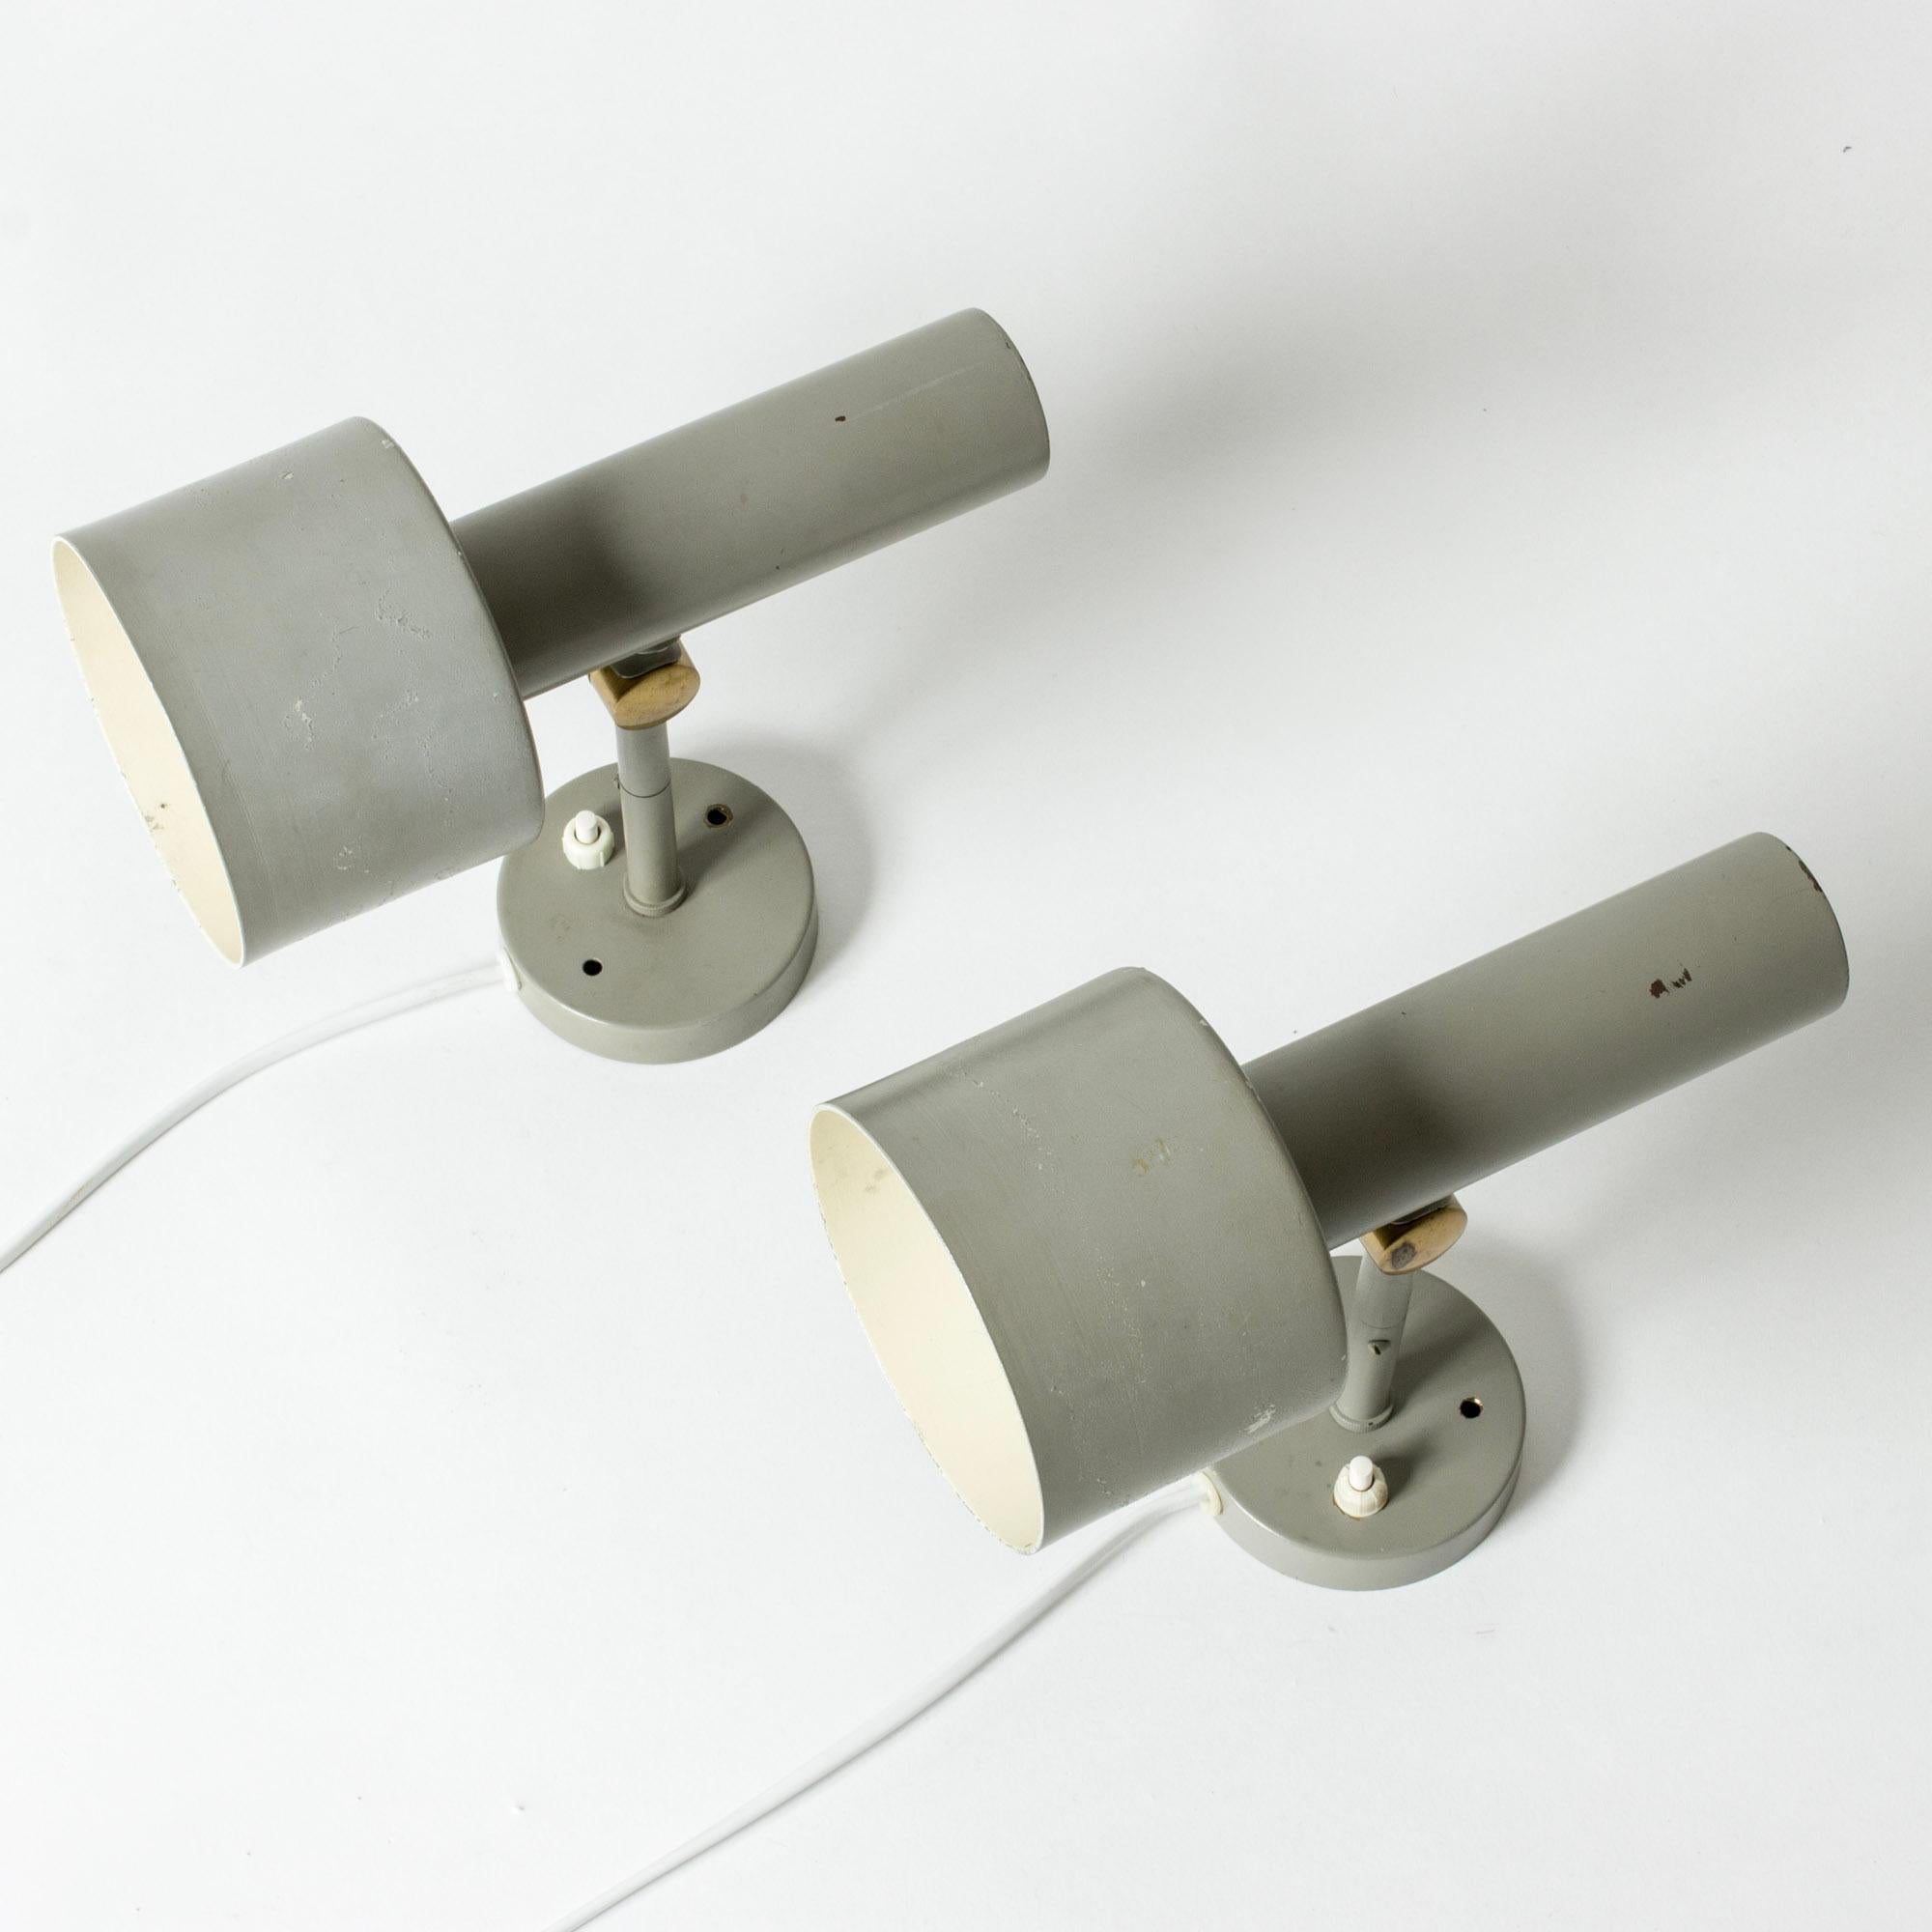 Pair of neat wall lamps by Hans Bergström with original grey lacquer. Cool, clean design with an industrial touch.

Hans Bergström was the owner and creative director of the lighting firm Ateljé Lyktan, which he founded in Åhus in the early 1930s.